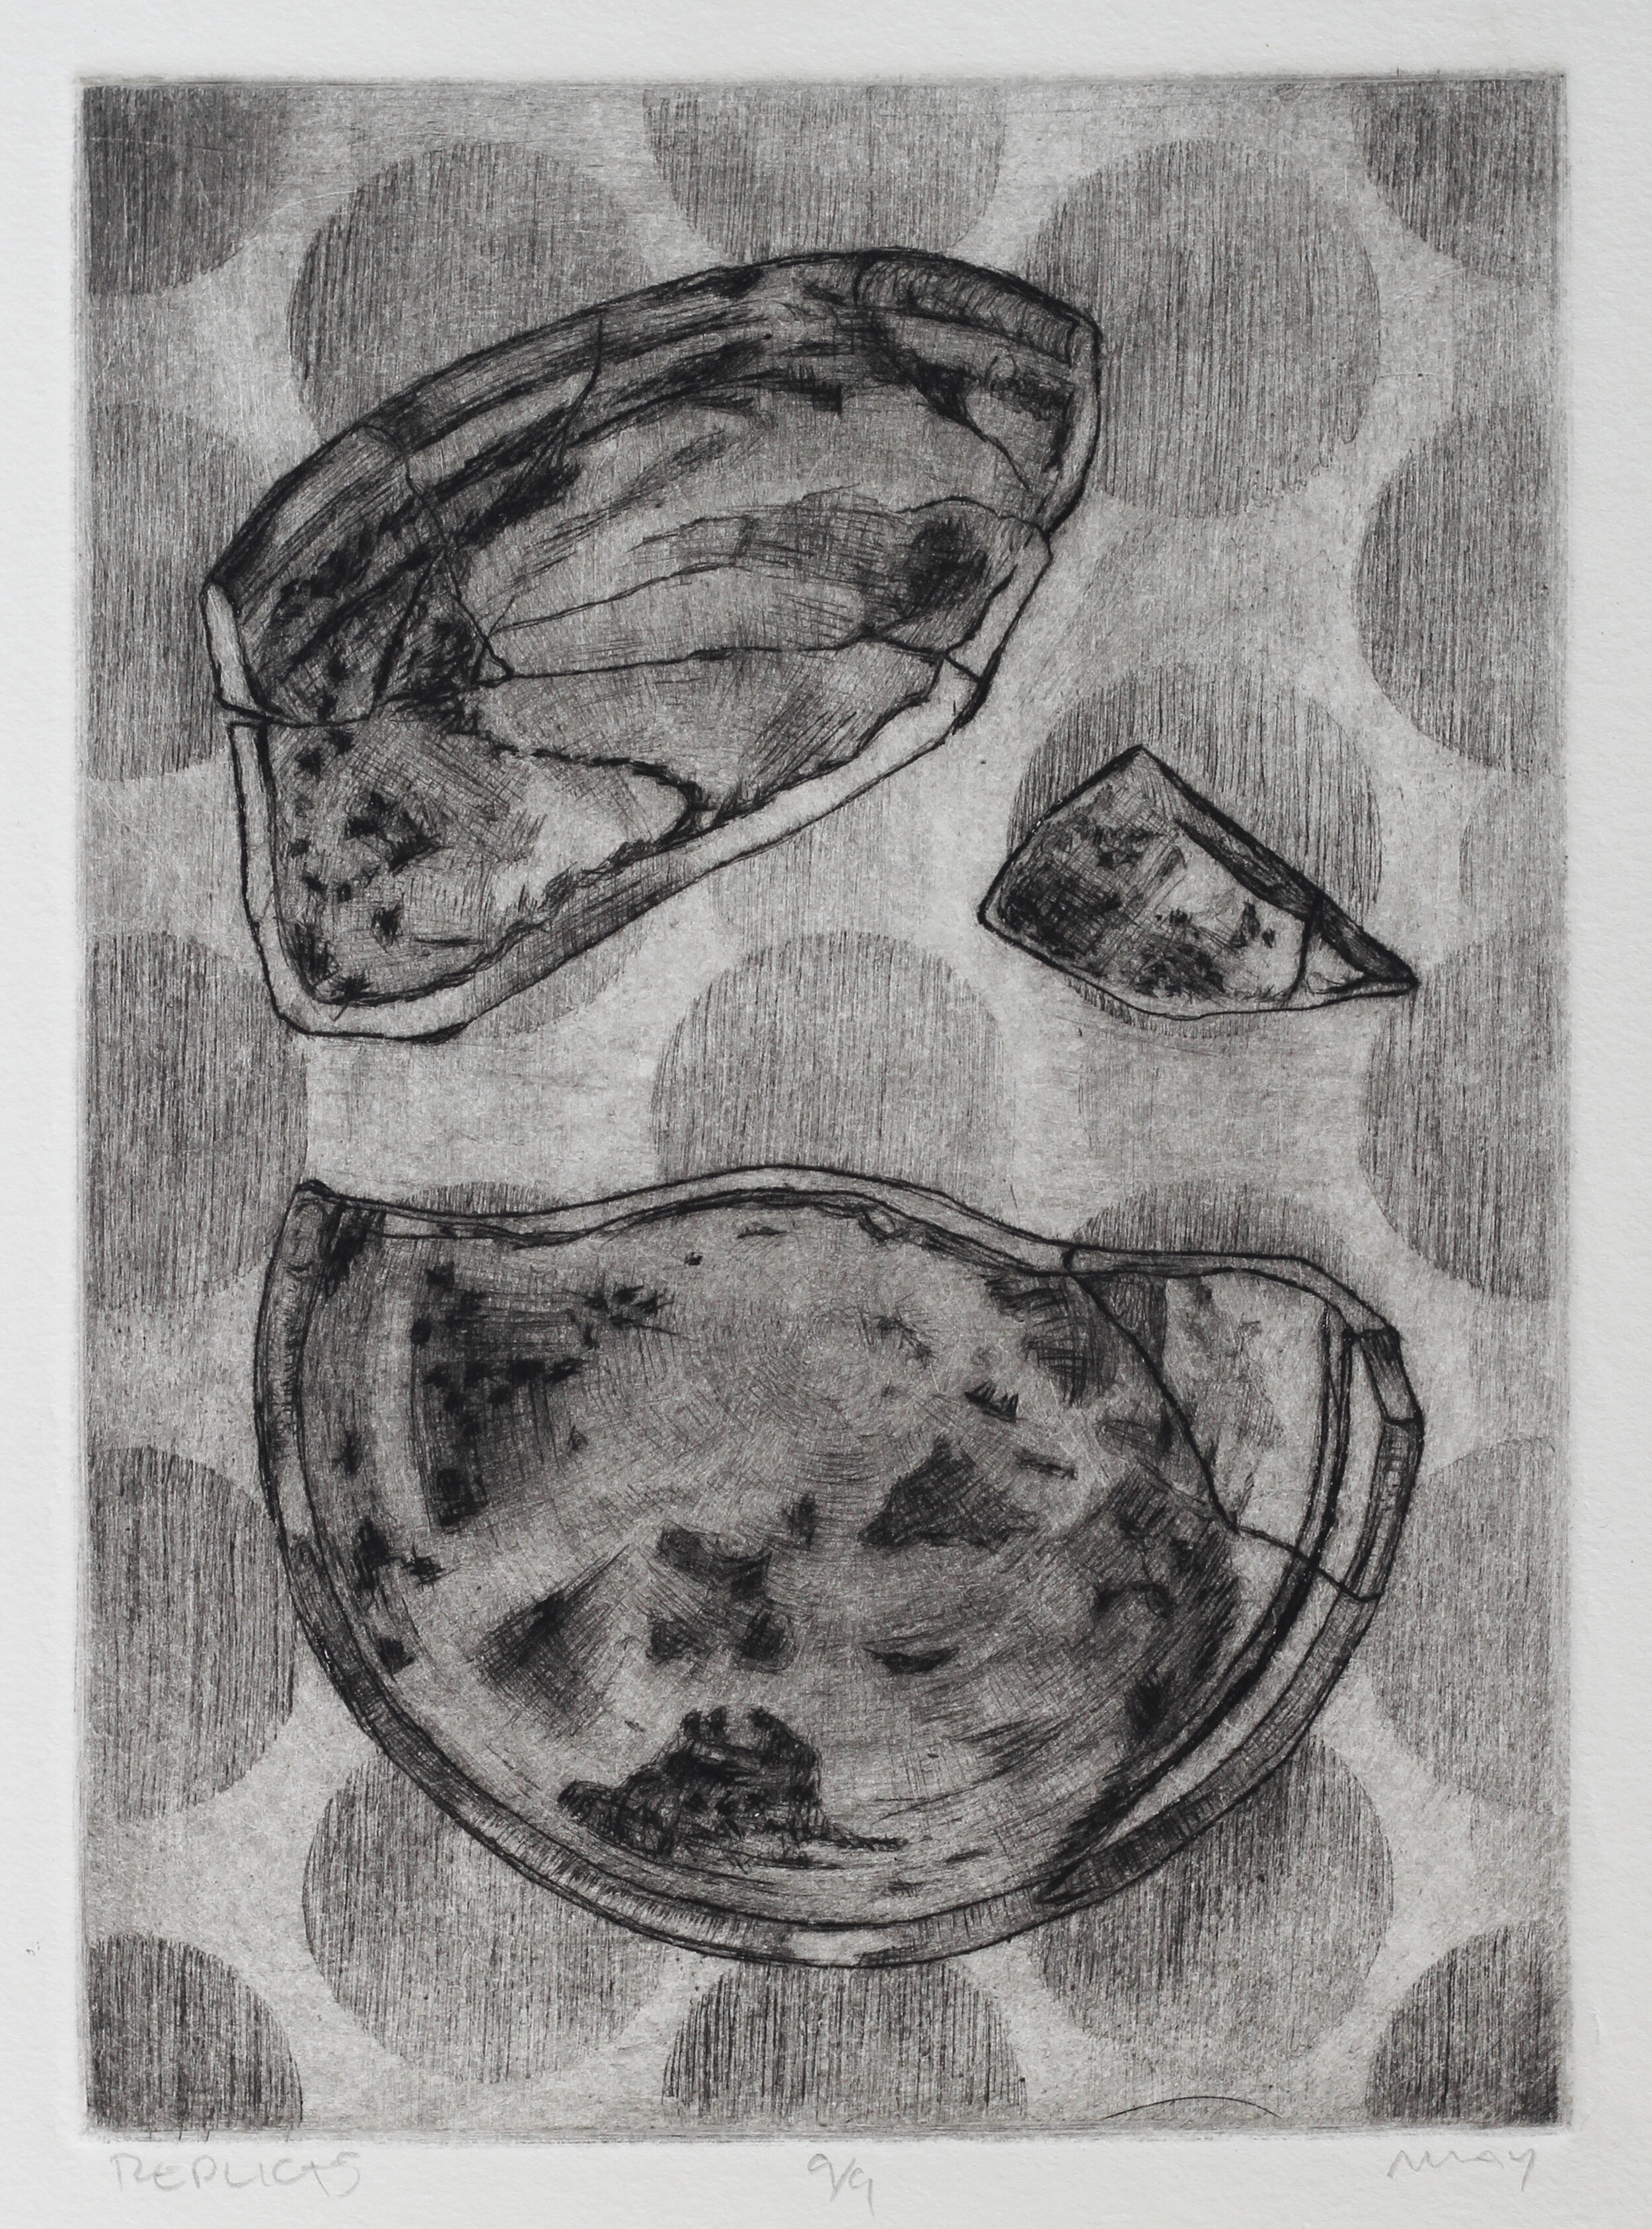   Replicas  5”x7” Dry Point (Edition of 9) 